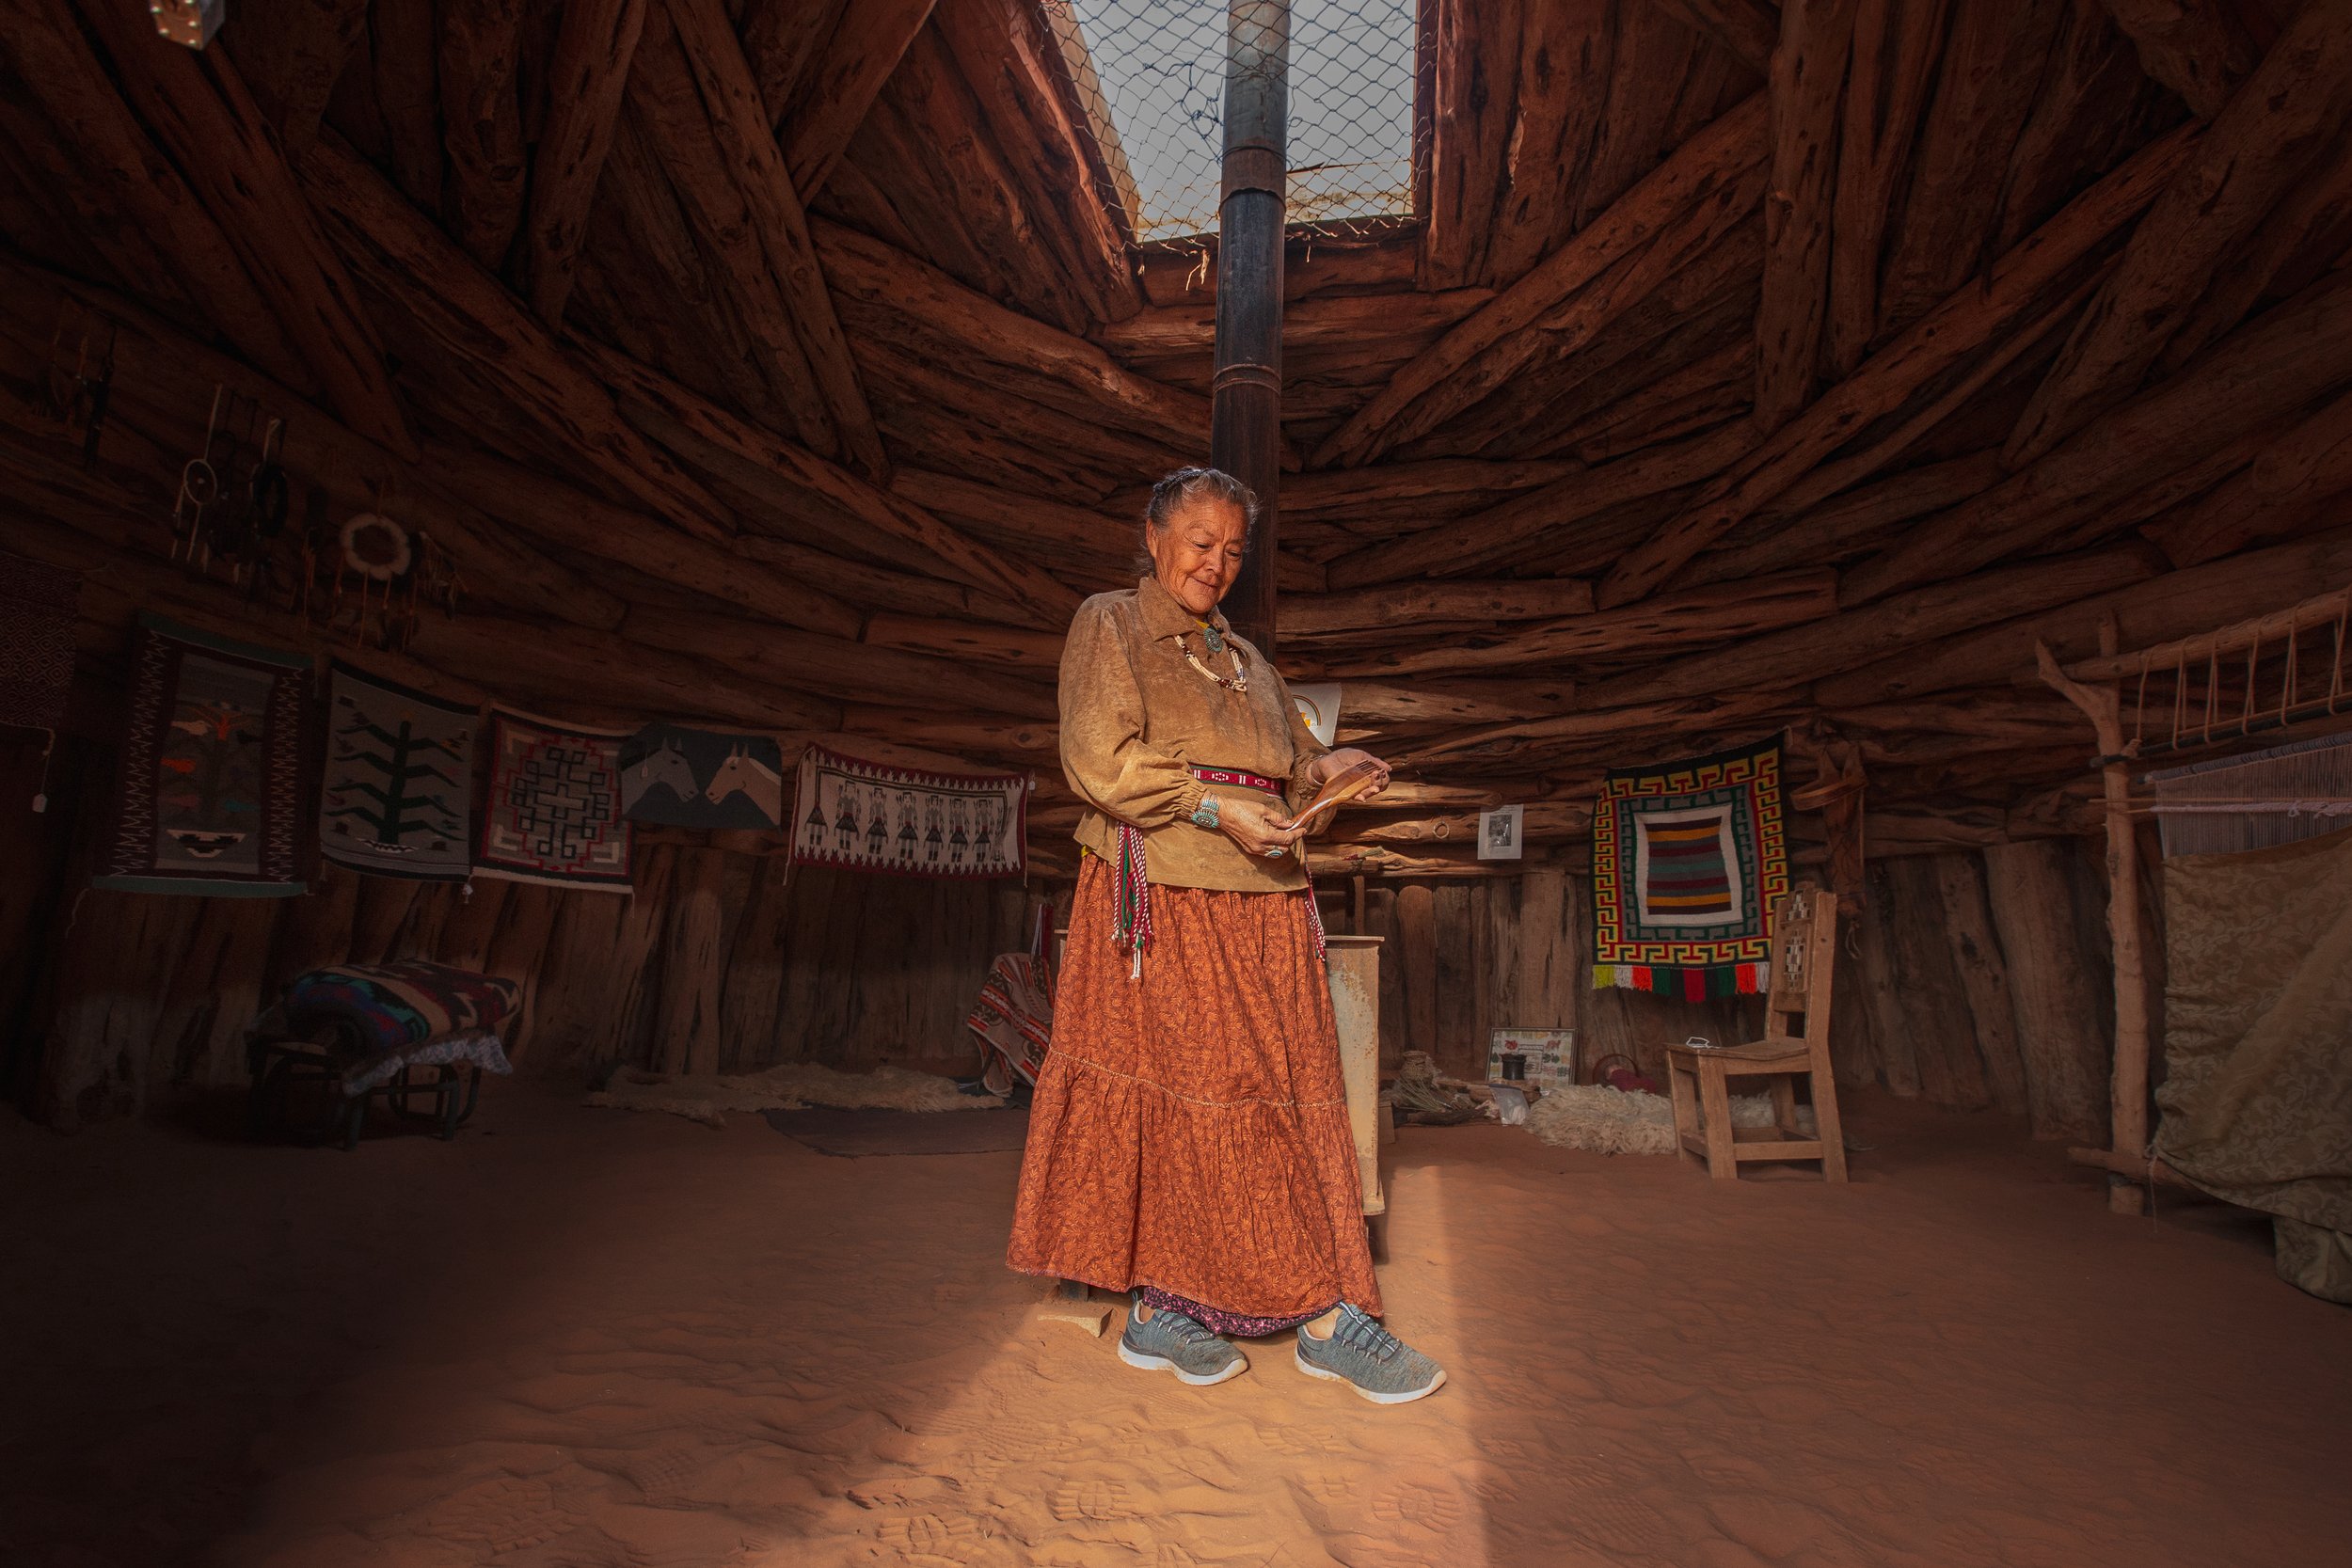  Effie Yazzie holds a weaving comb her family made for her inside her hogan. The hogan’s main source of light comes from the doorway and the hole in the roof for the furnace.  